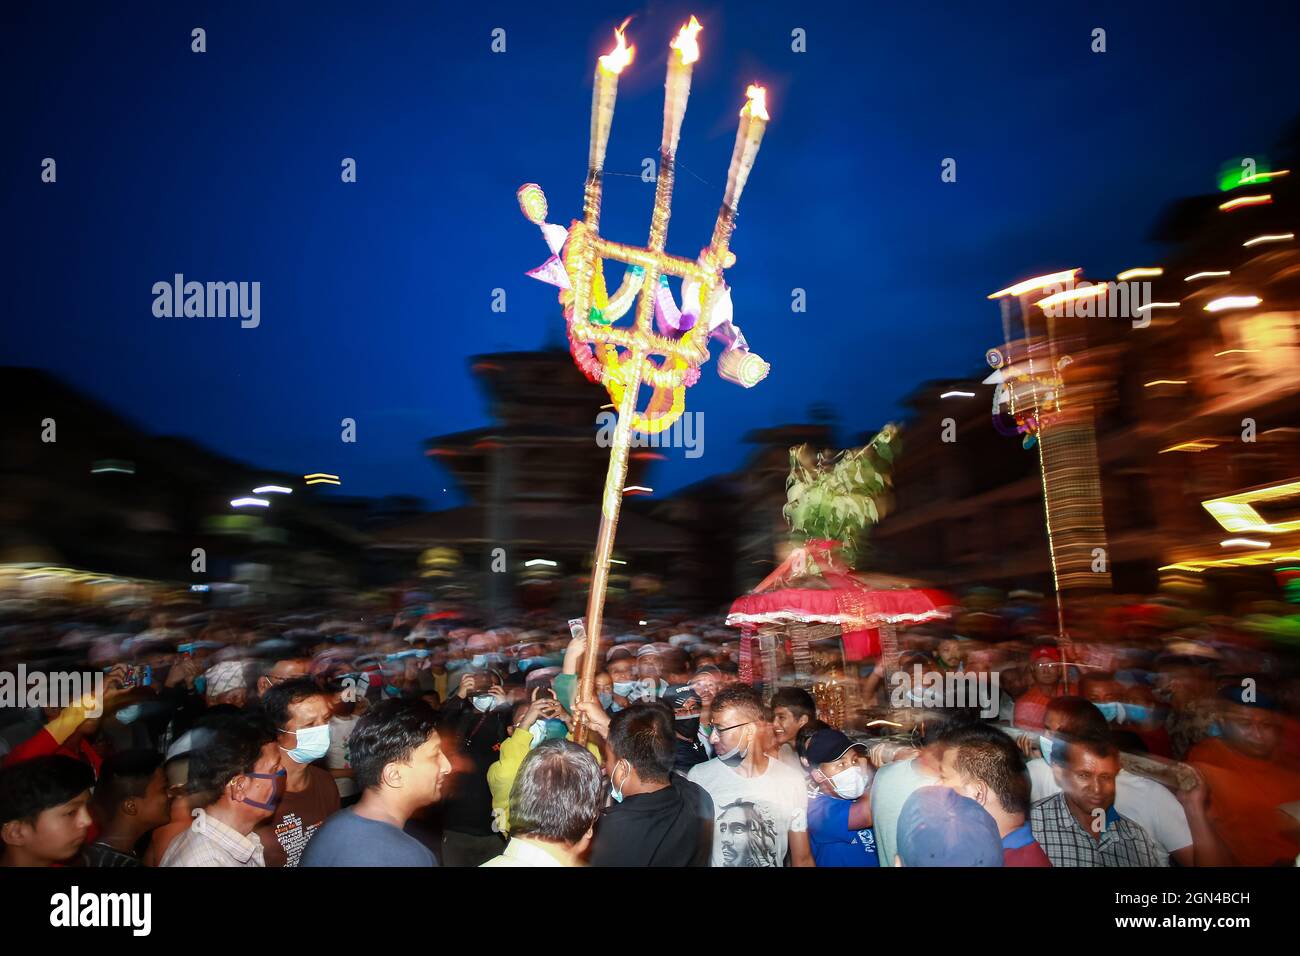 Bhaktapur, Bagmati, Nepal. 22nd Sep, 2021. The Manandhar community of the local sakolaan tol burns a pair of yamata (sky lamps) in front of the Bhimsen temple at Dattatraya Bhaktapur, Nepal on Wednesday, September 22, 2021.The Mupatra Jatra of Bhaktapur is based on various religious texts, is celebrated in Bhaktapur for three days from Ashwin Krishna II to IV. Credit: Amit Machamasi/ZUMA Wire/Alamy Live News Stock Photo